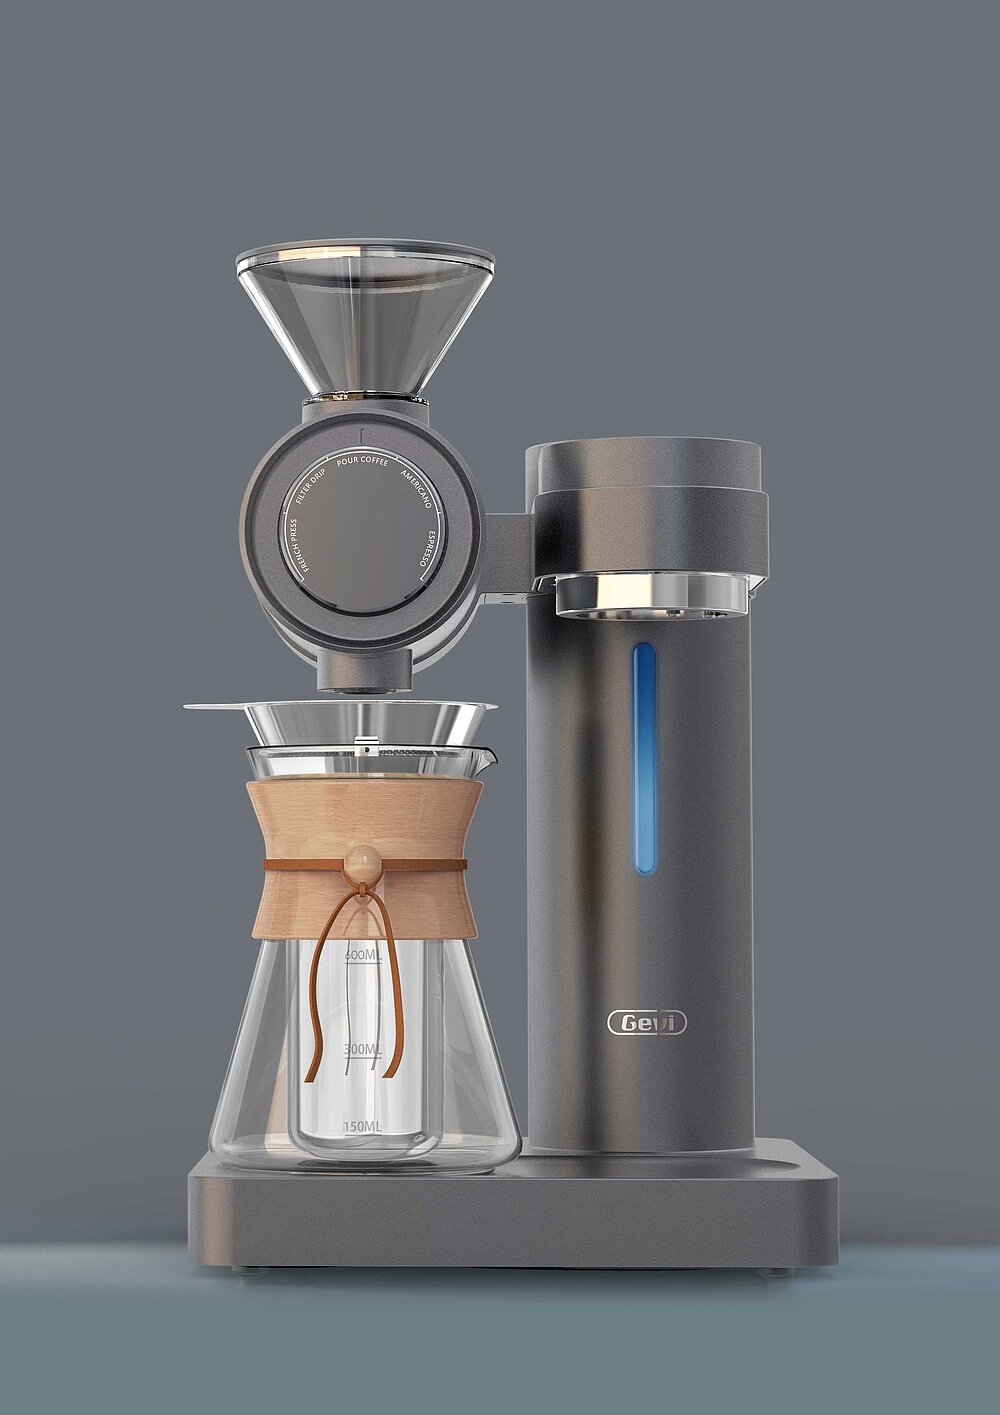 CASCADE: Automatic Pour-over Coffee Maker on Behance